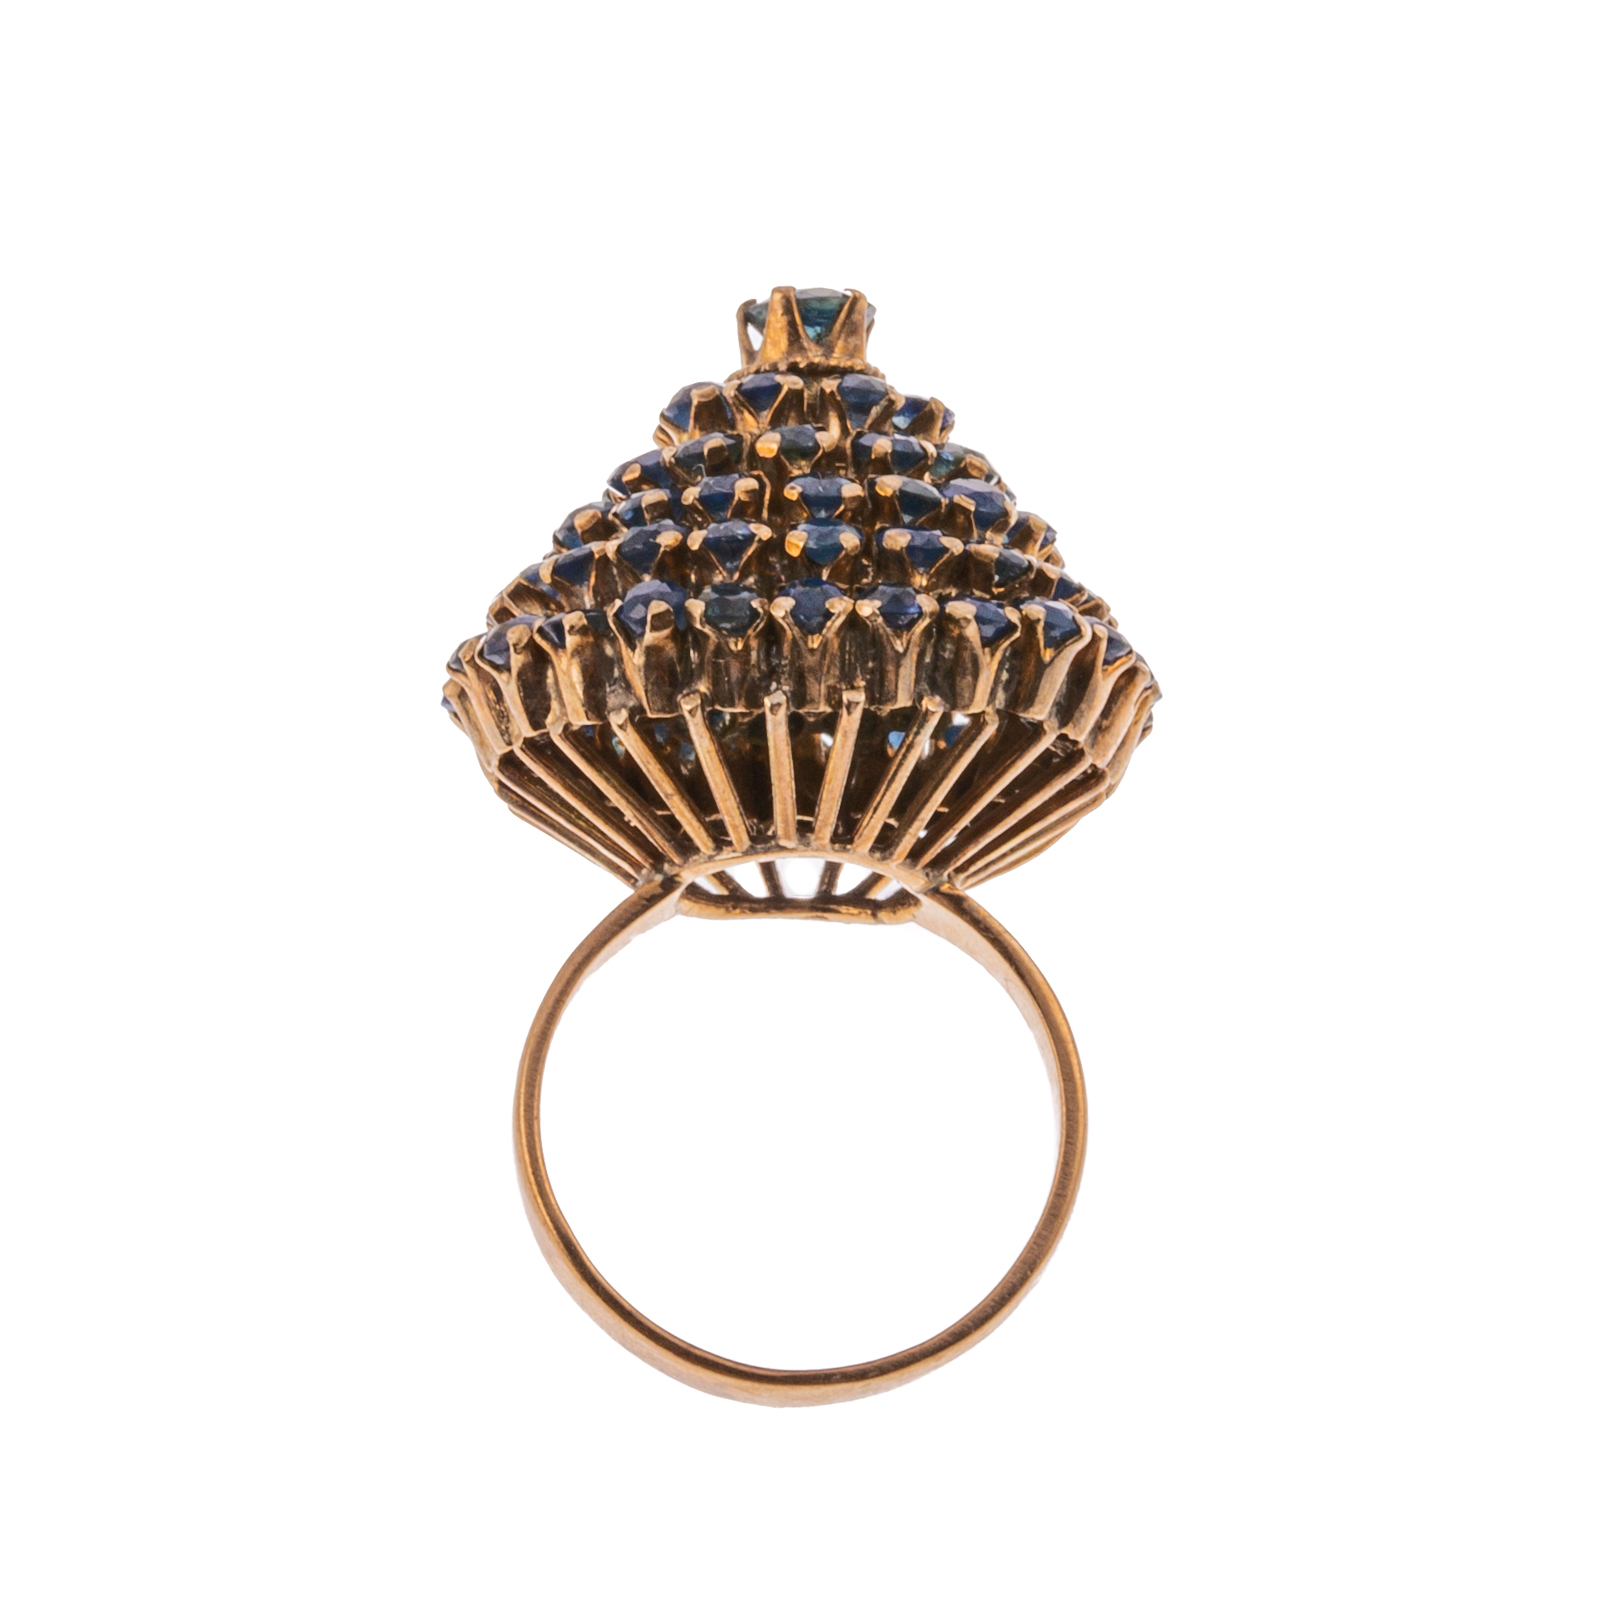 A SAPPHIRE DOME RING IN 14K 14K